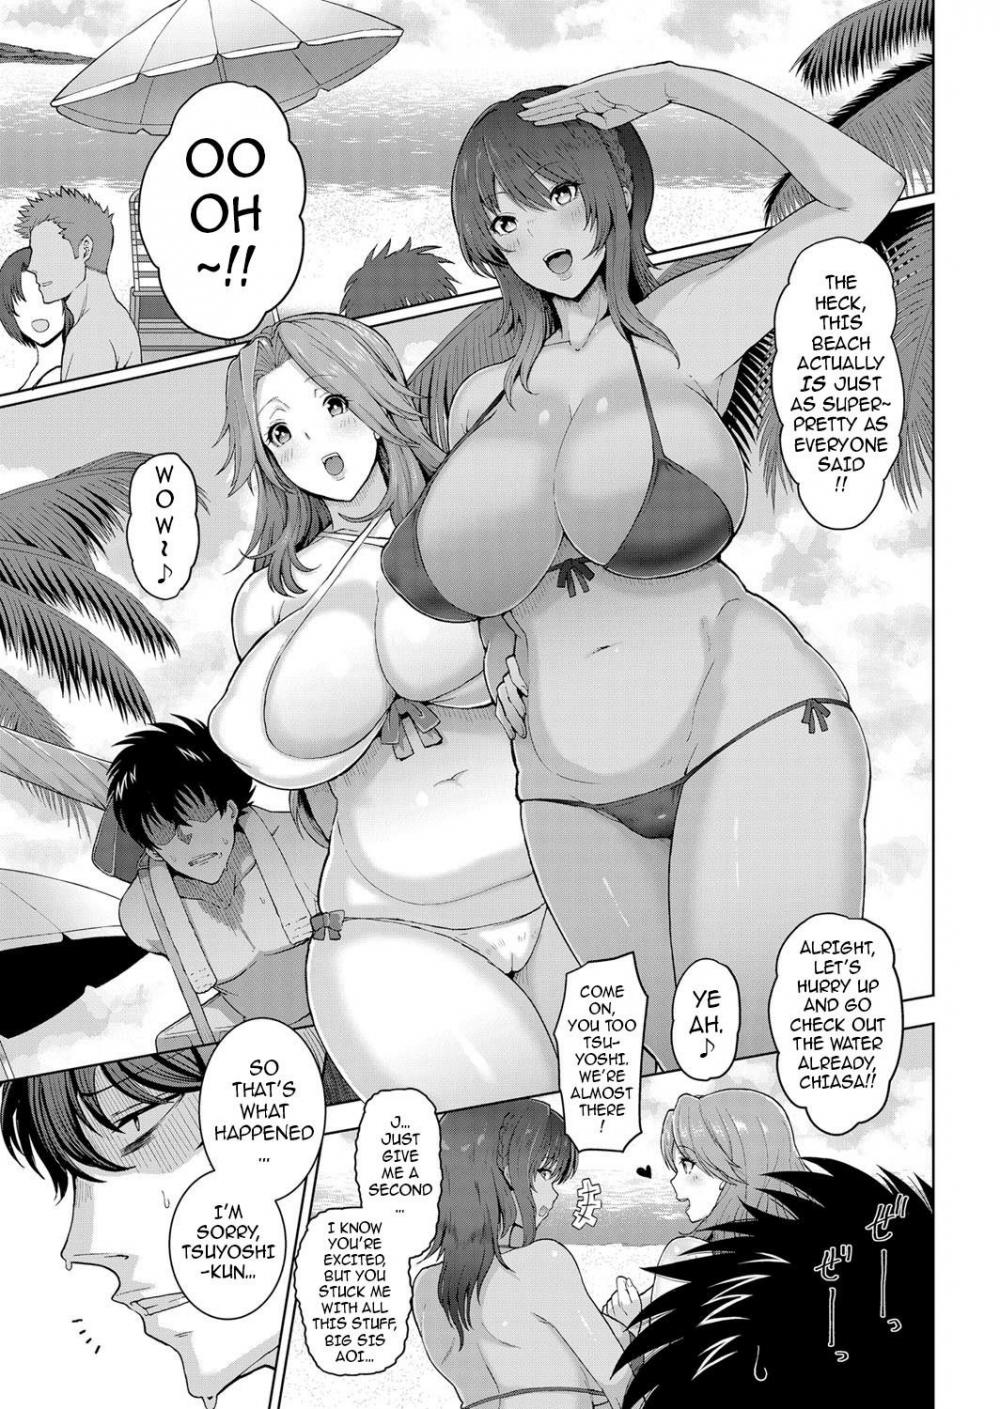 Hentai Manga Comic-The Three Older, Mature Sisters Next Door 1 -The Frustrated Widow and Me--Read-1